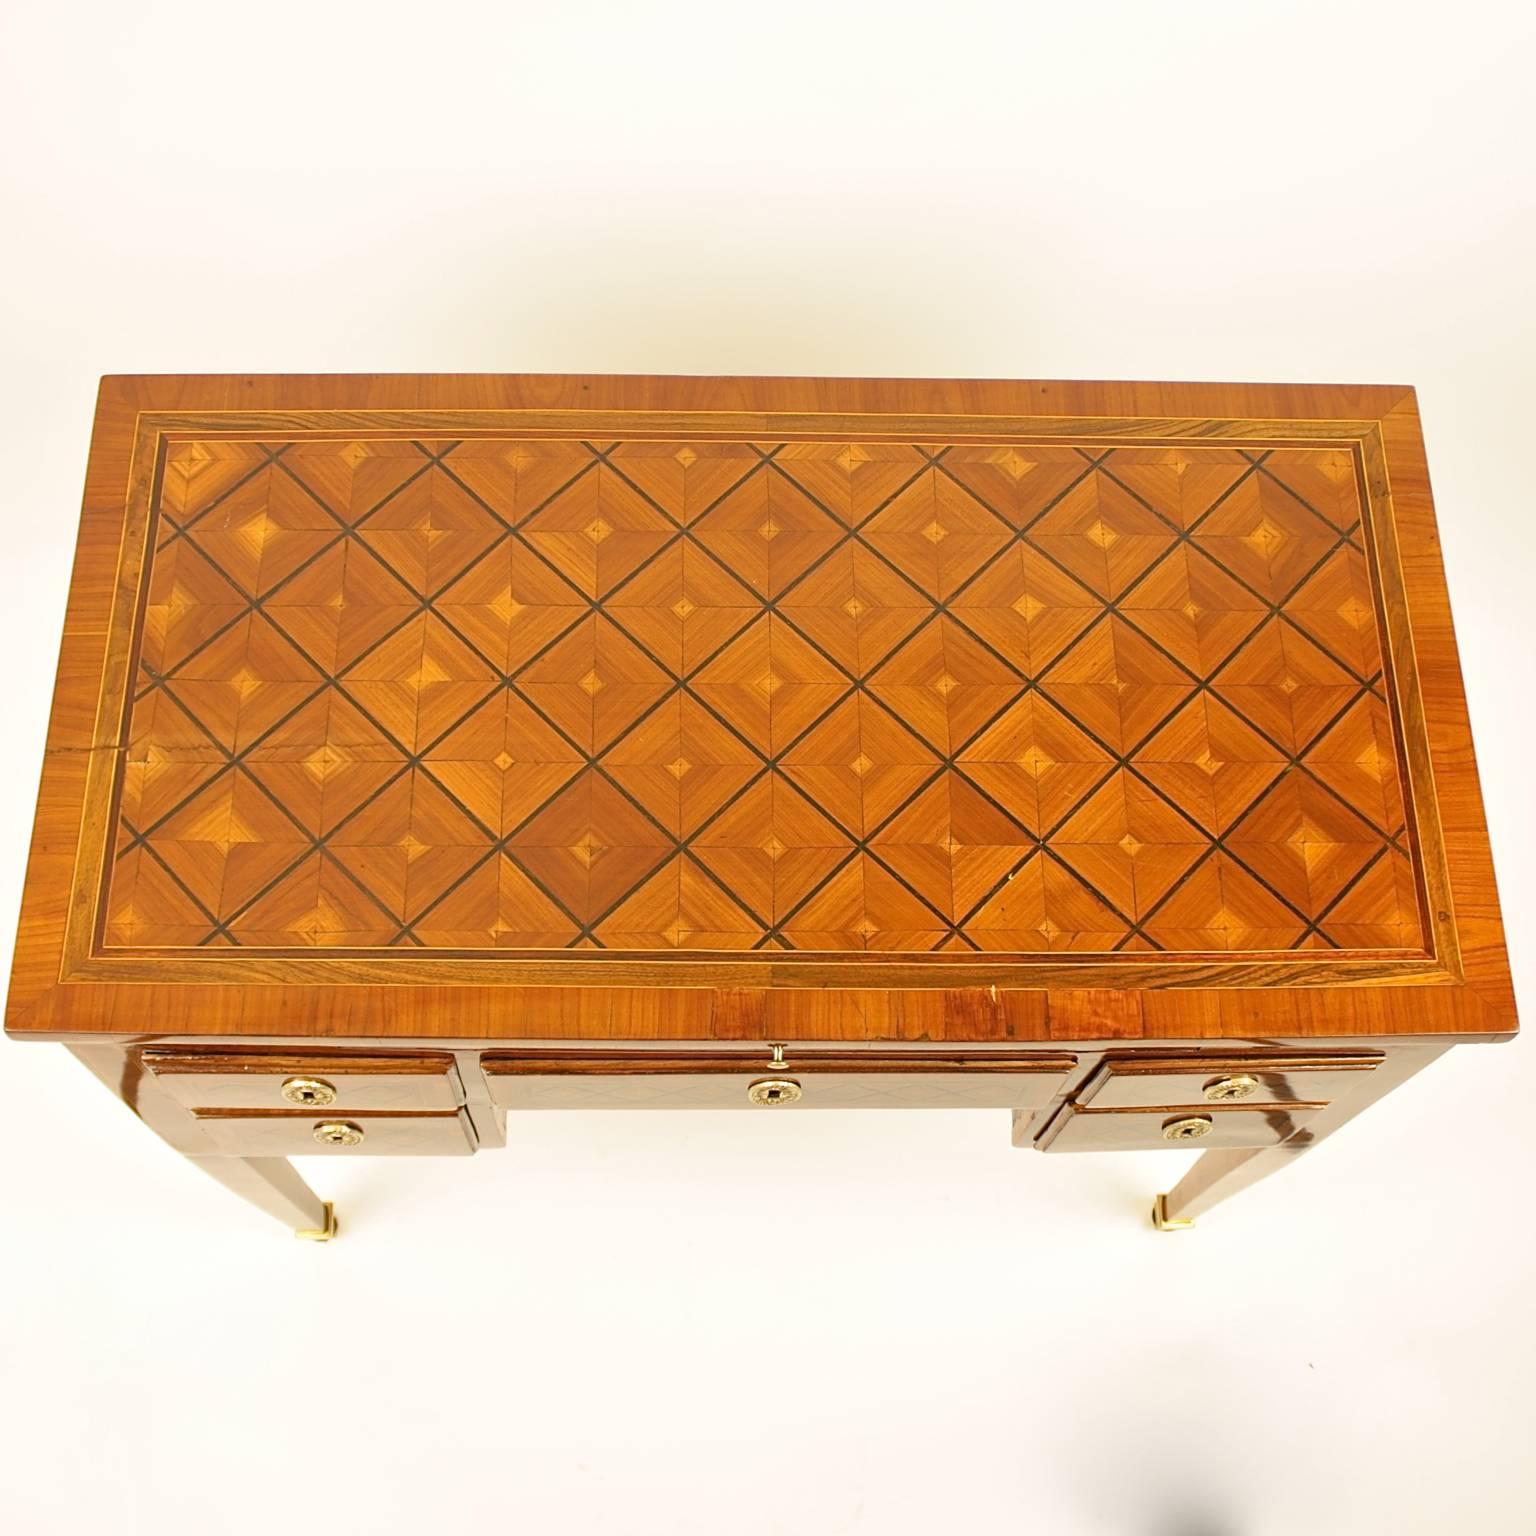 Wood Late 18th Century French Marquetry Desk, in the manner of J.Birckle 1734-1803